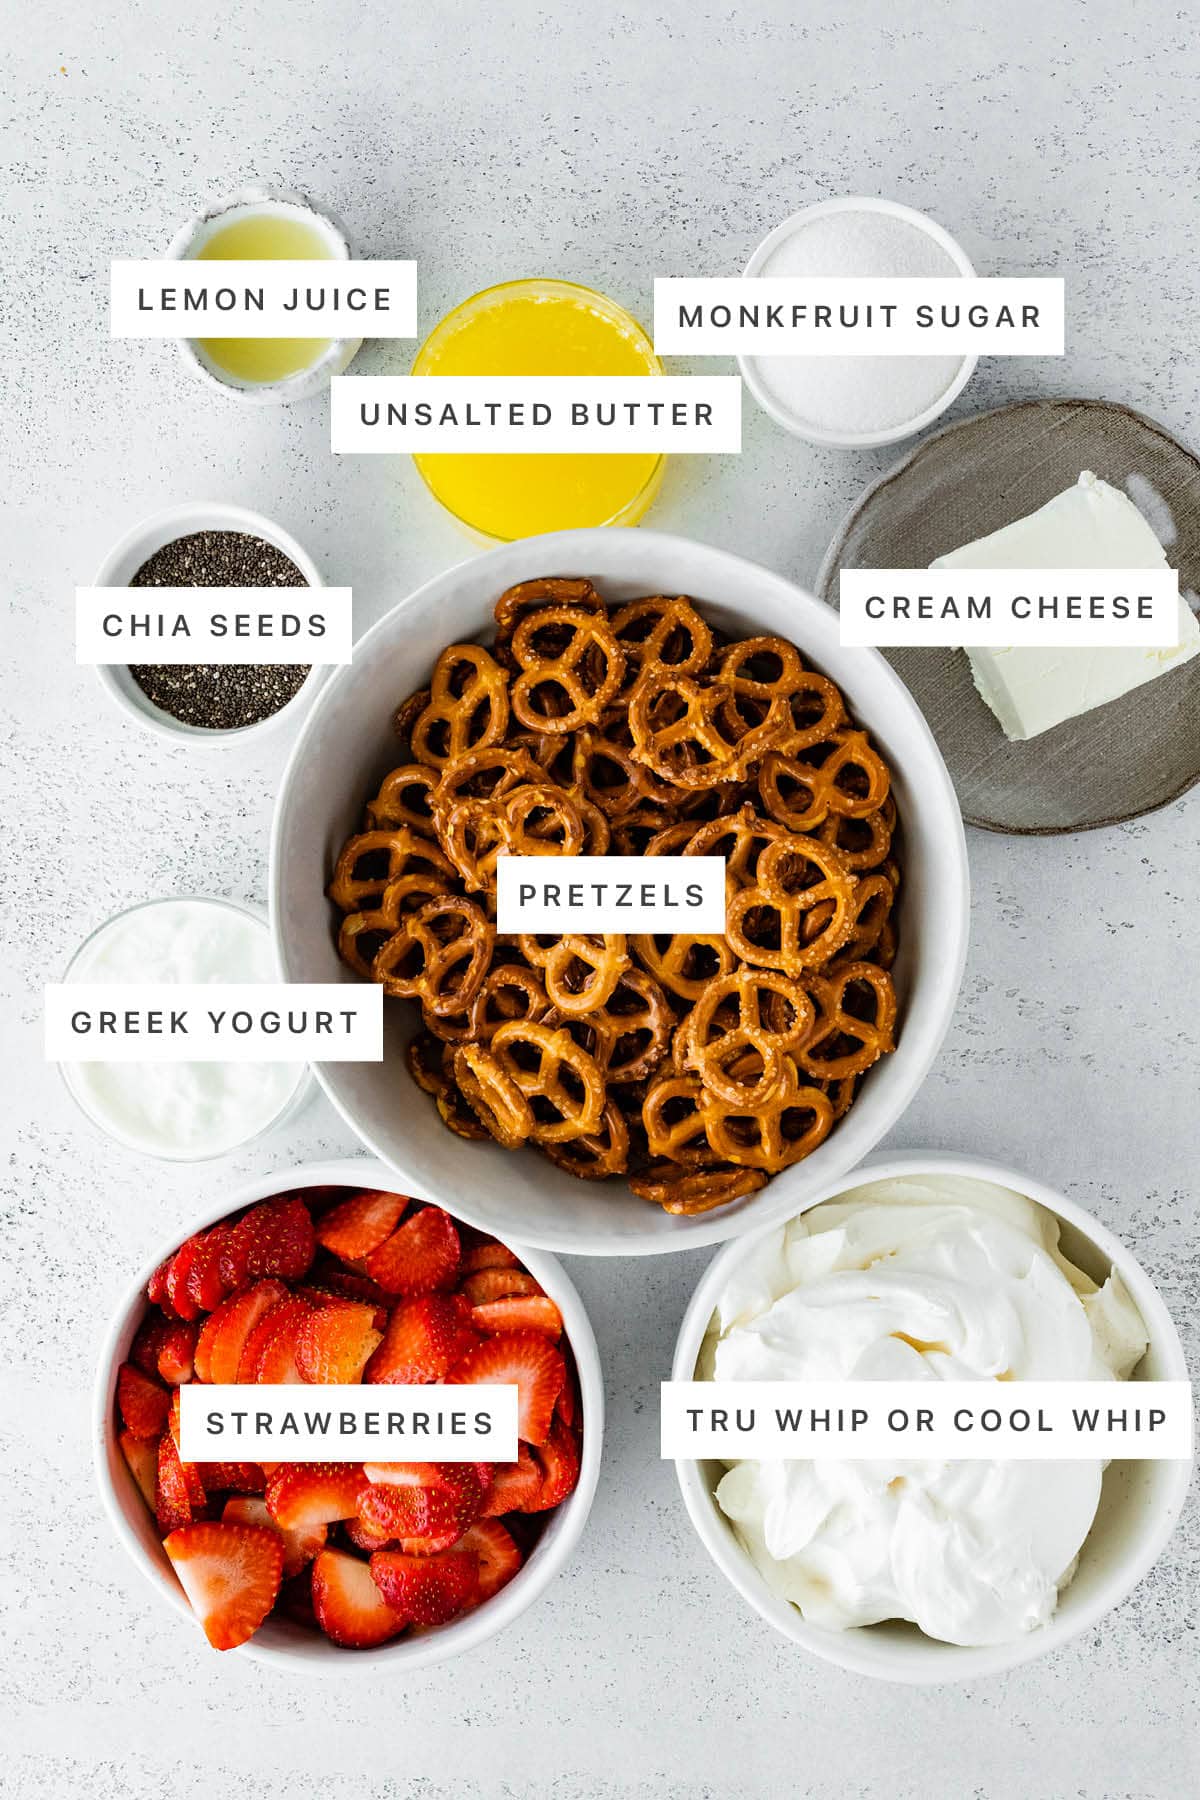 Ingredients measured out to make Healthy Strawberry Pretzel Salad: lemon juice, unsalted butter, monkfruit sugar, chia seeds, cream cheese, pretzels, Greek yogurt, strawberries and whipped topping.